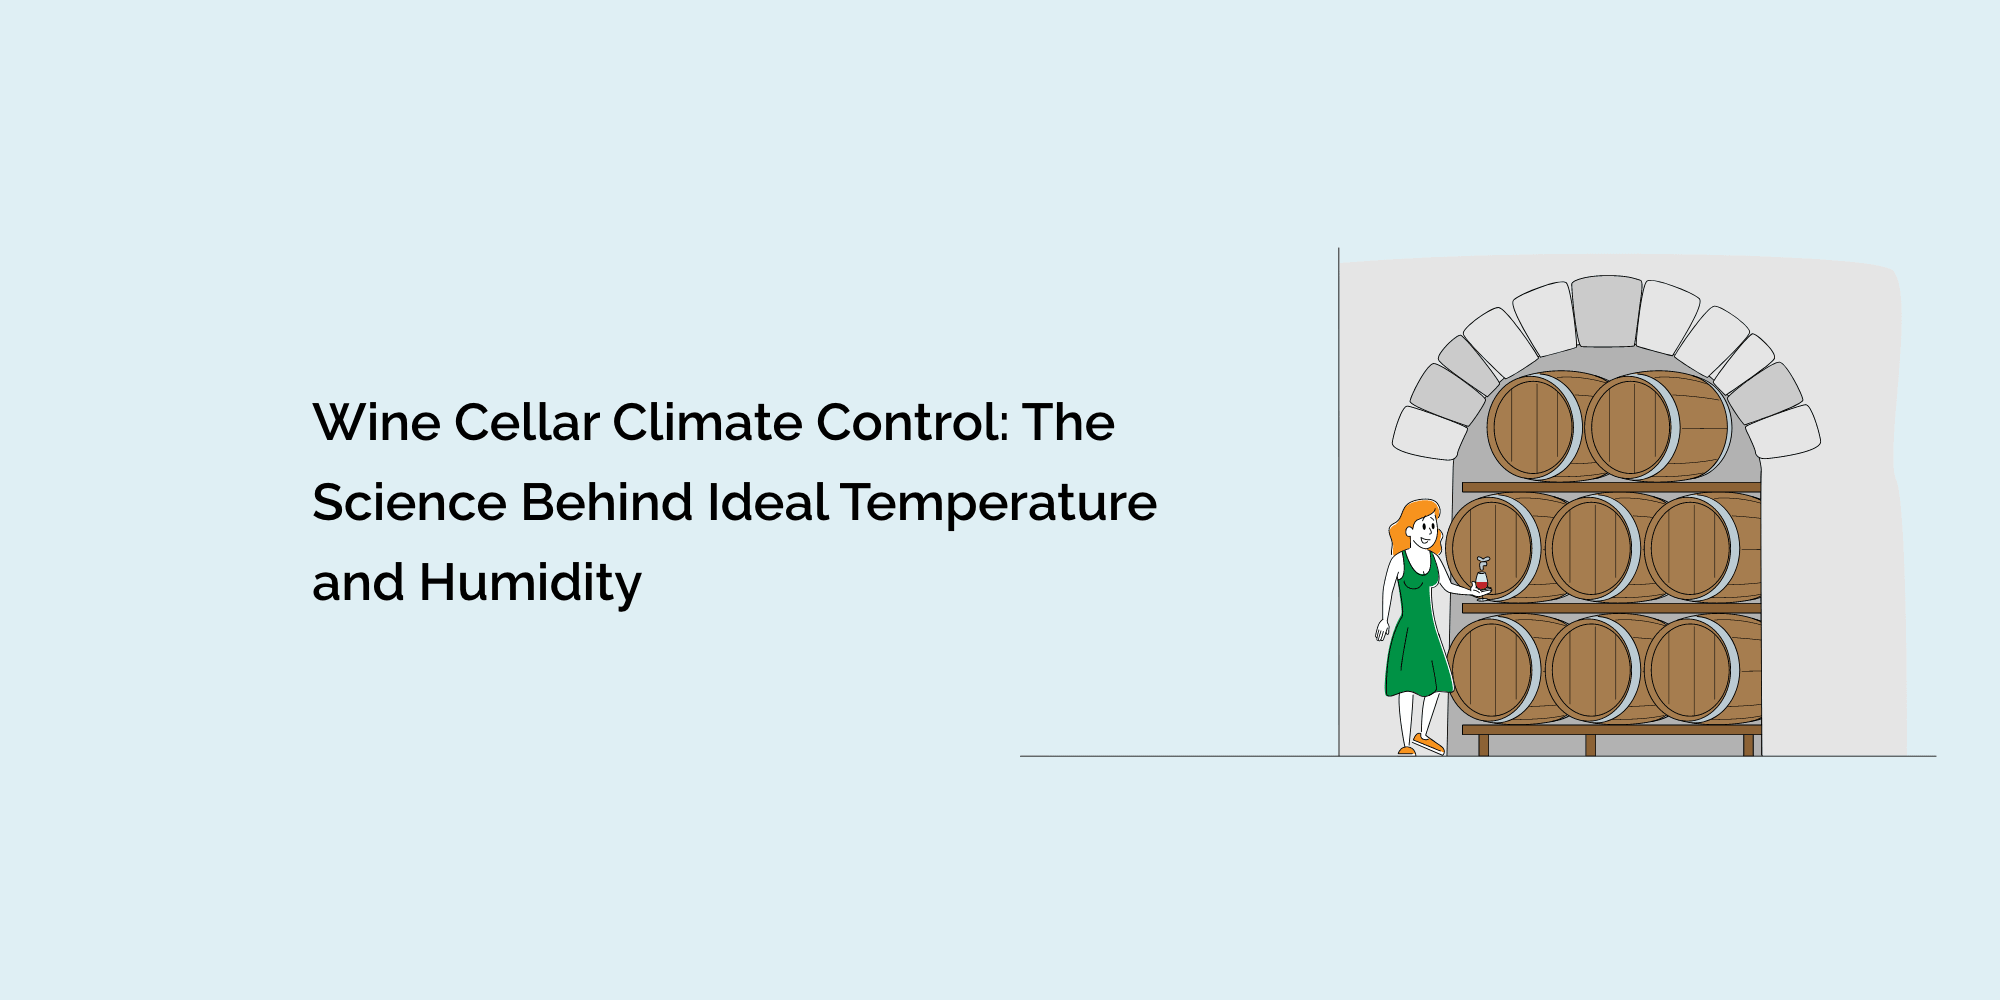 Wine Cellar Climate Control: The Science Behind Ideal Temperature and Humidity